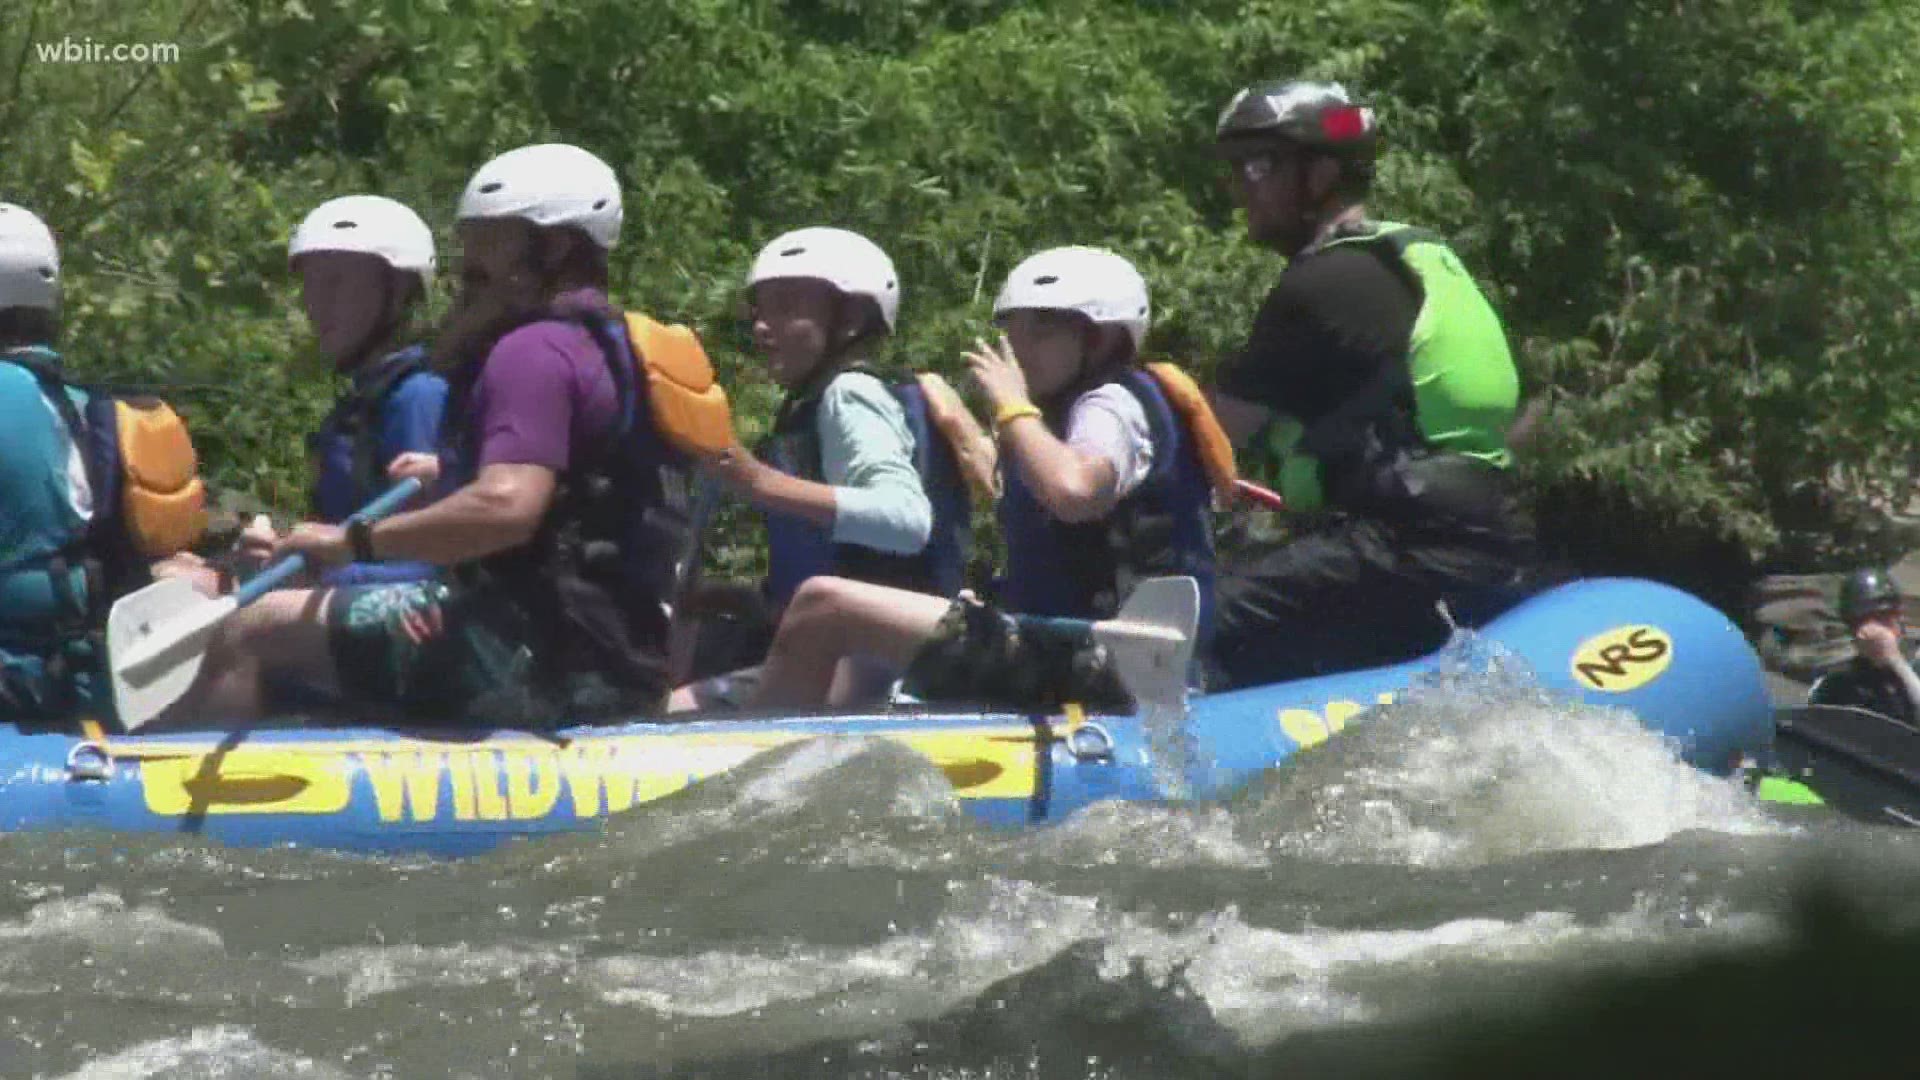 The pandemic delayed the usual white water rafting schedule, but Pigeon River companies are hopeful to get back on track while maintaining safety guidelines.